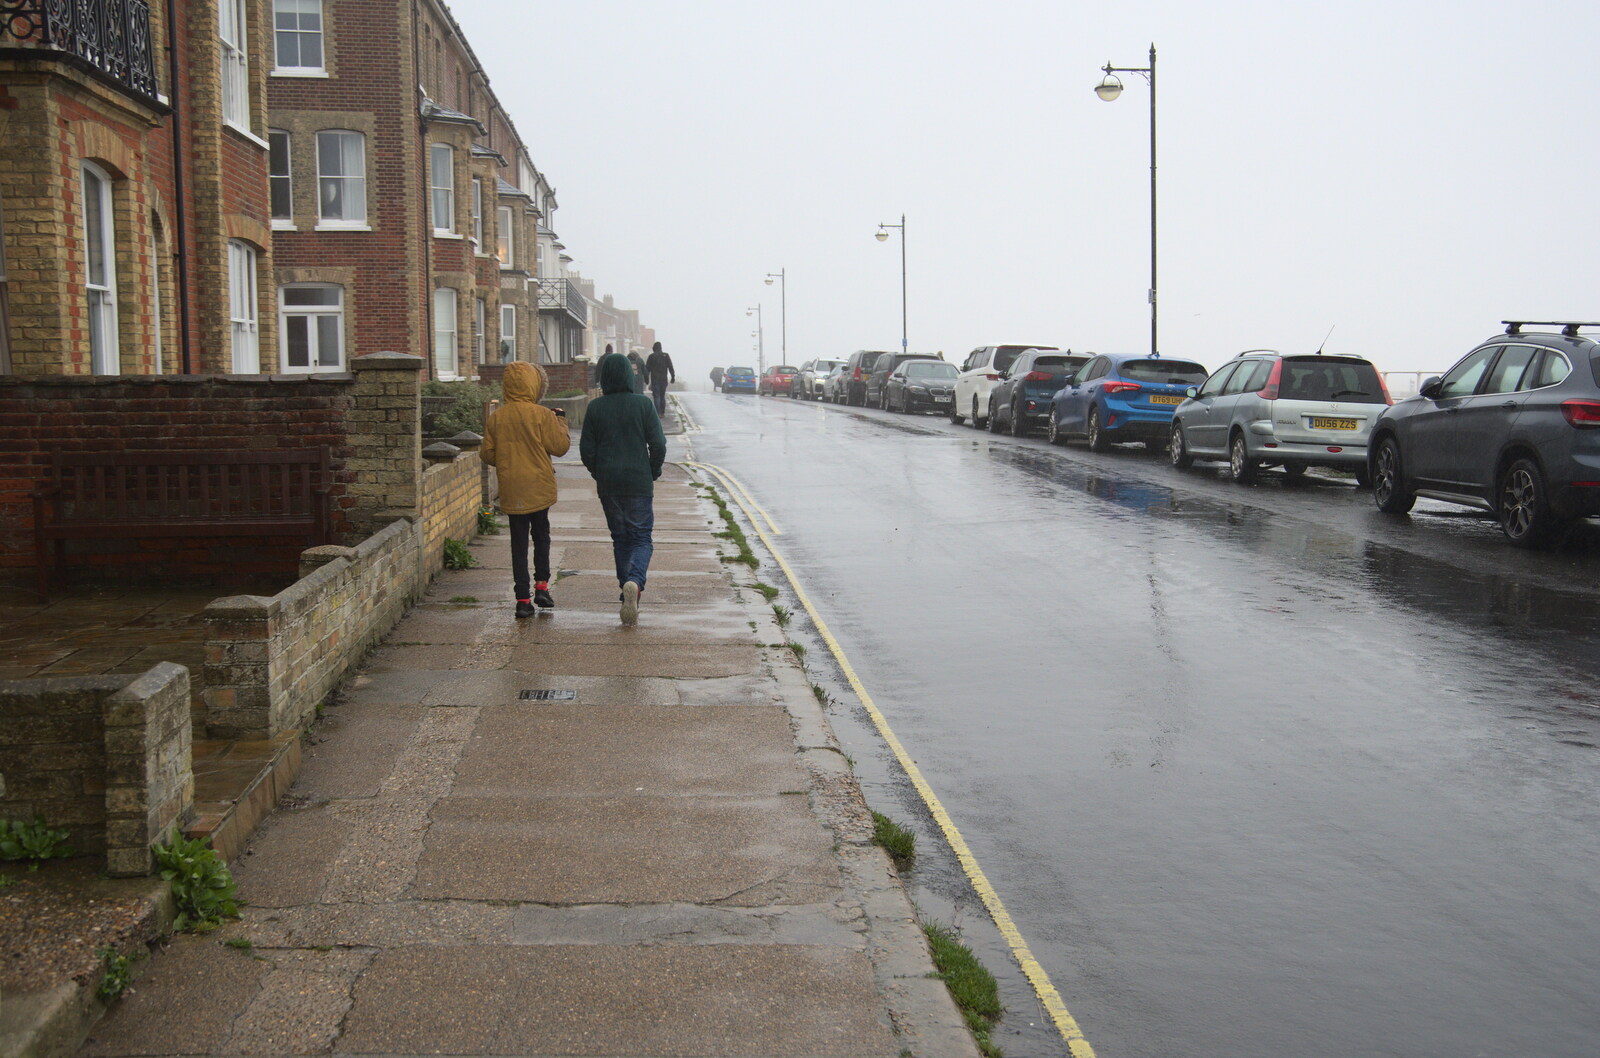 The boys walk along a wet North Parade from A Few Hours at the Seaside, Southwold, Suffolk - 27th December 2021